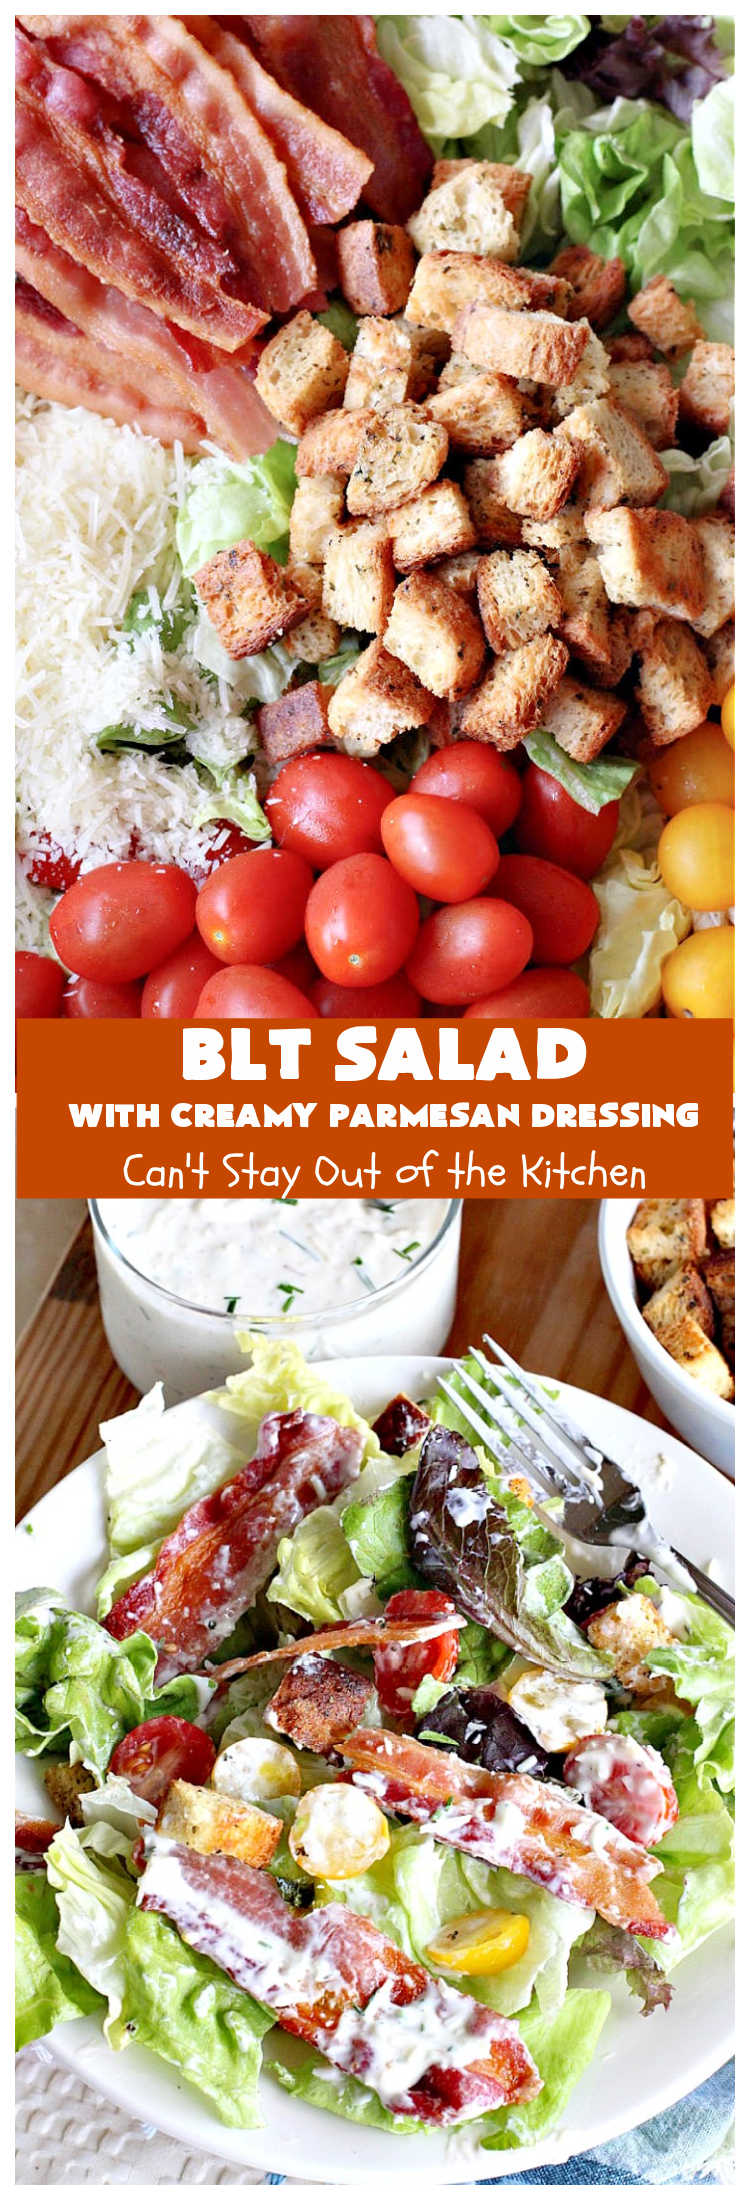 BLT Salad | Can't Stay Out of the Kitchen | This spectacular #salad takes the best of #BLT sandwiches and makes them into a salad instead! Served with a homemade creamy #parmesan dressing & homemade #GlutenFree #croutons! Amazing. #BLTSalad #bacon #CreamyParmesanDressing #tomatoes #pork